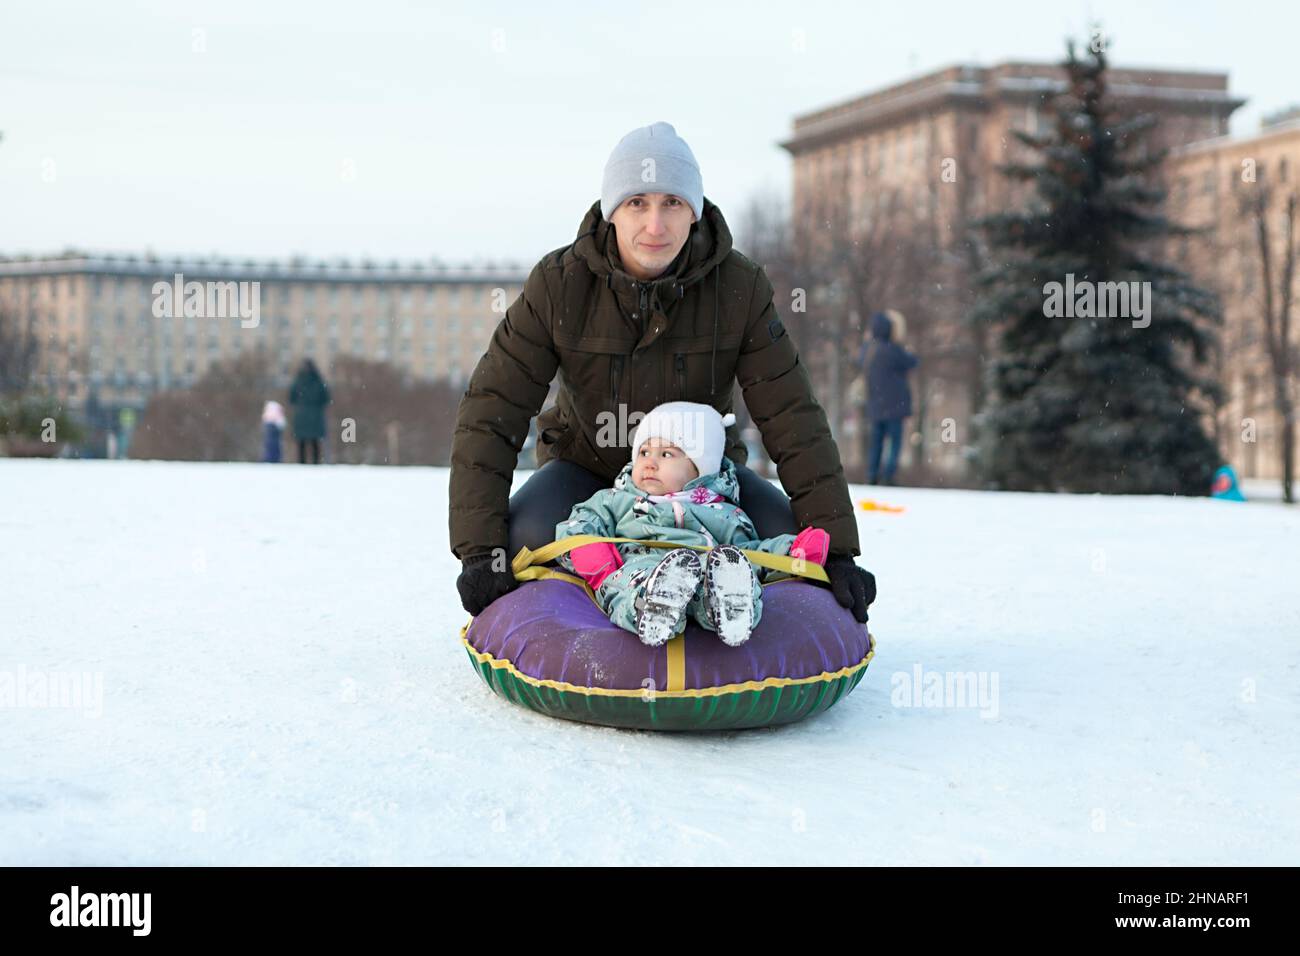 Father push her child from snowy slope, kid sitting in an inflatable toboggan, winter season is in Russian city Stock Photo